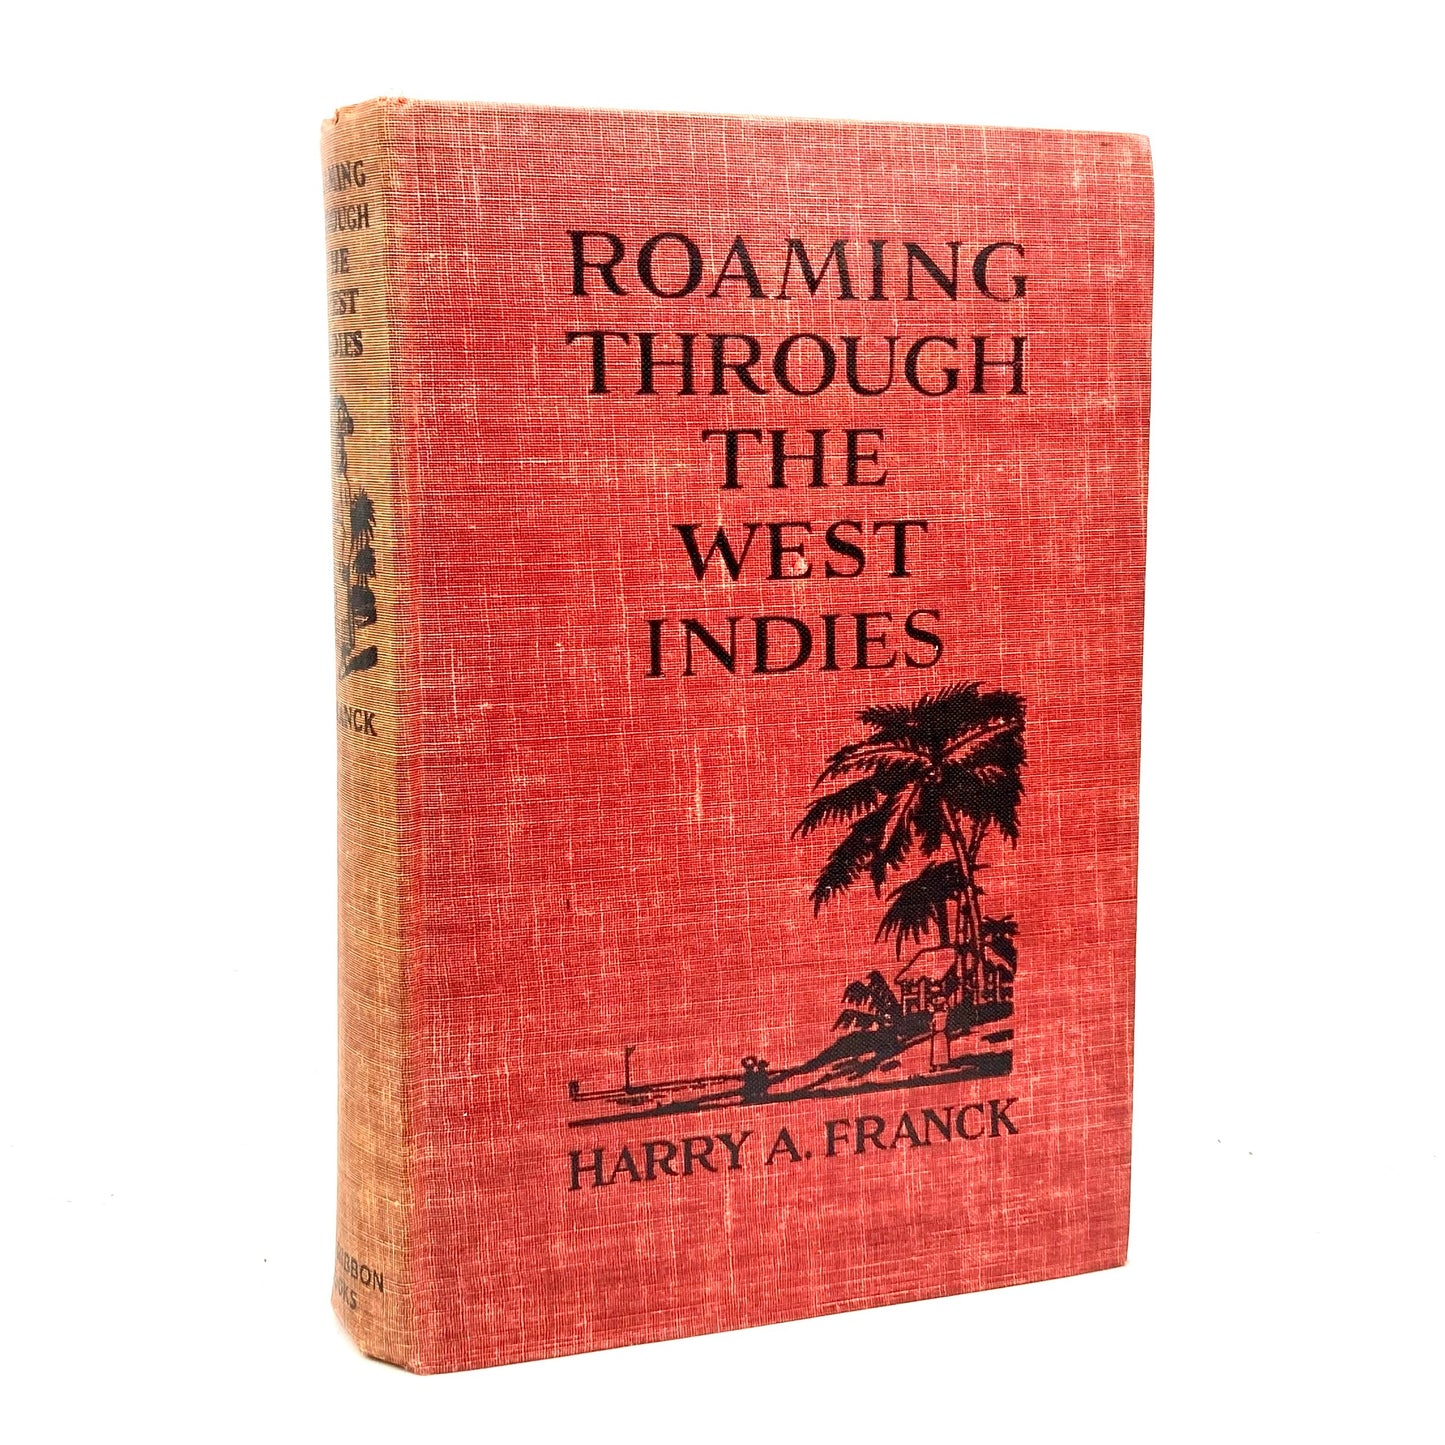 FRANCK, Harry A. "Roaming Through the West Indies" [Blue Ribbon Books, 1920] - Buzz Bookstore